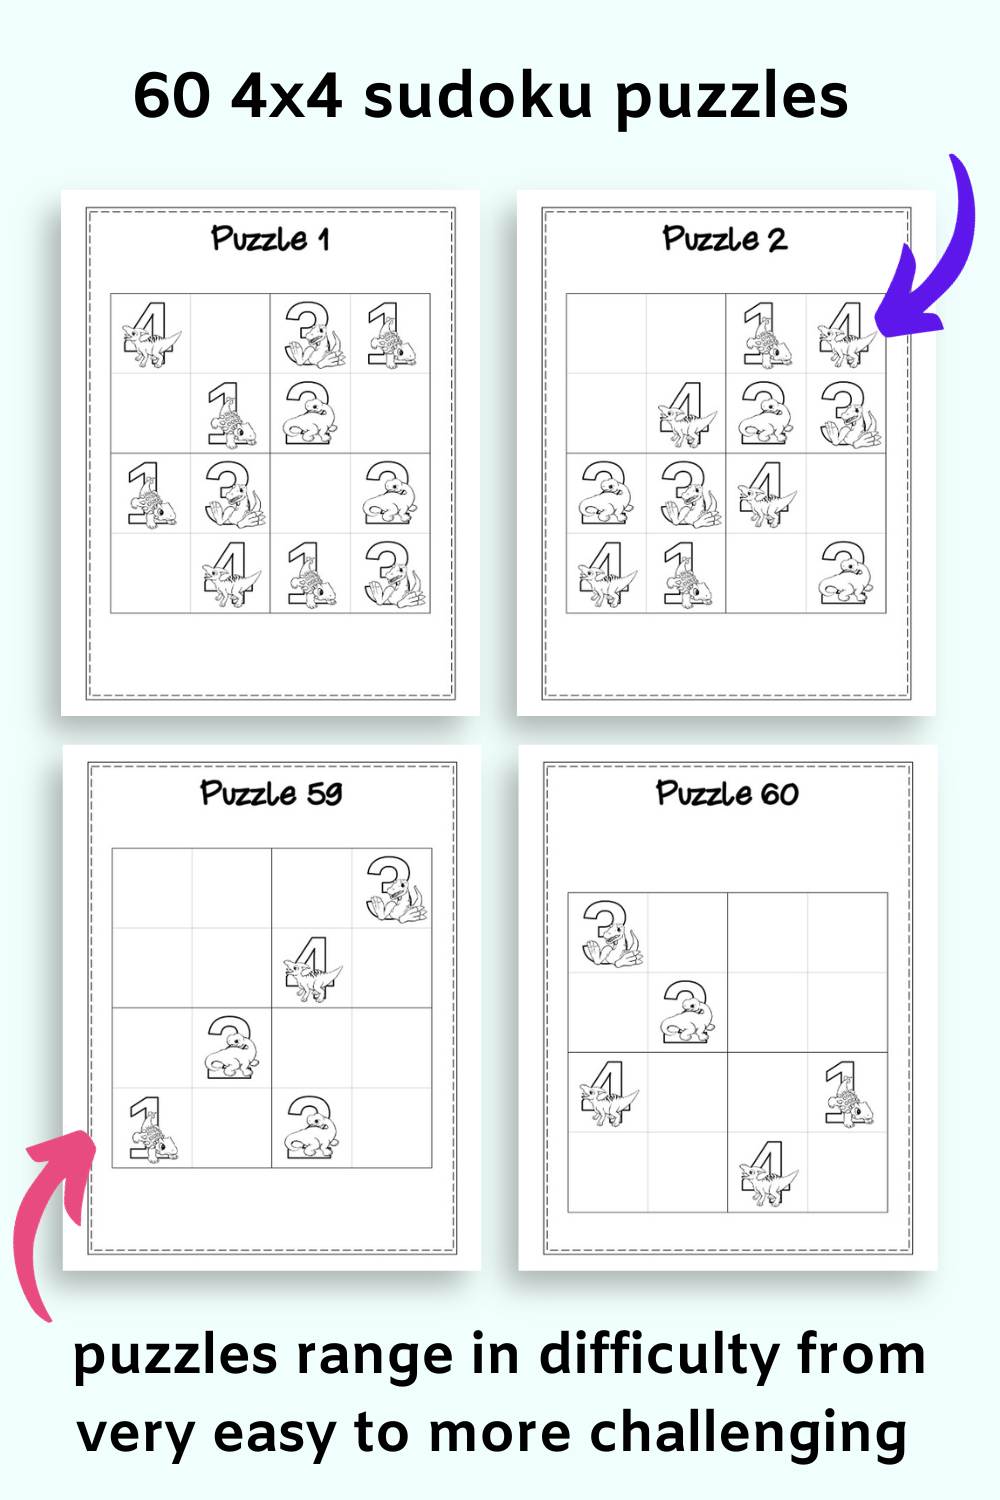 A preview of four dinosaur themed 4x4 sudoku puzzles for kids with text "60 4x4 sudoku puzzles" and "puzzles range in difficulty from very easy to more challenging"